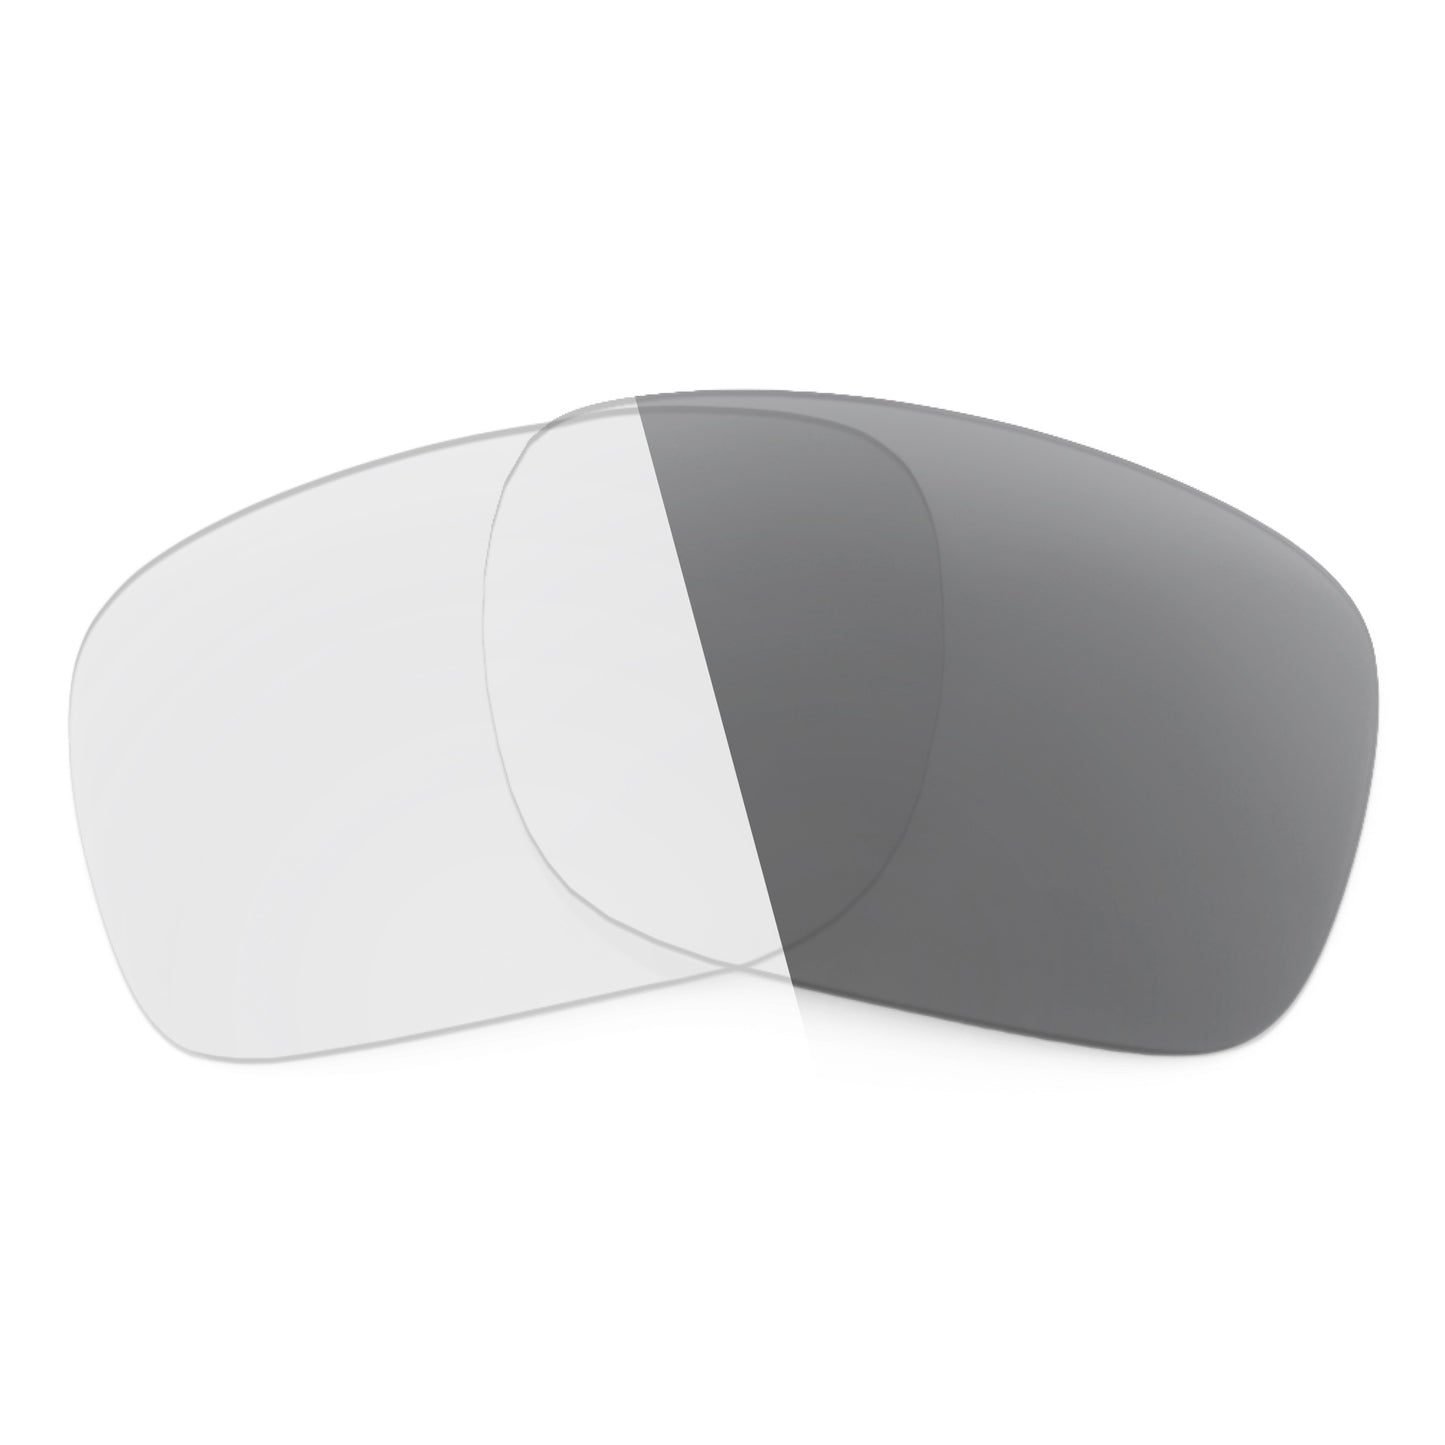 Revant replacement lenses for Ray-Ban Drifter (B&L) 56mm Non-Polarized Adapt Gray Photochromic